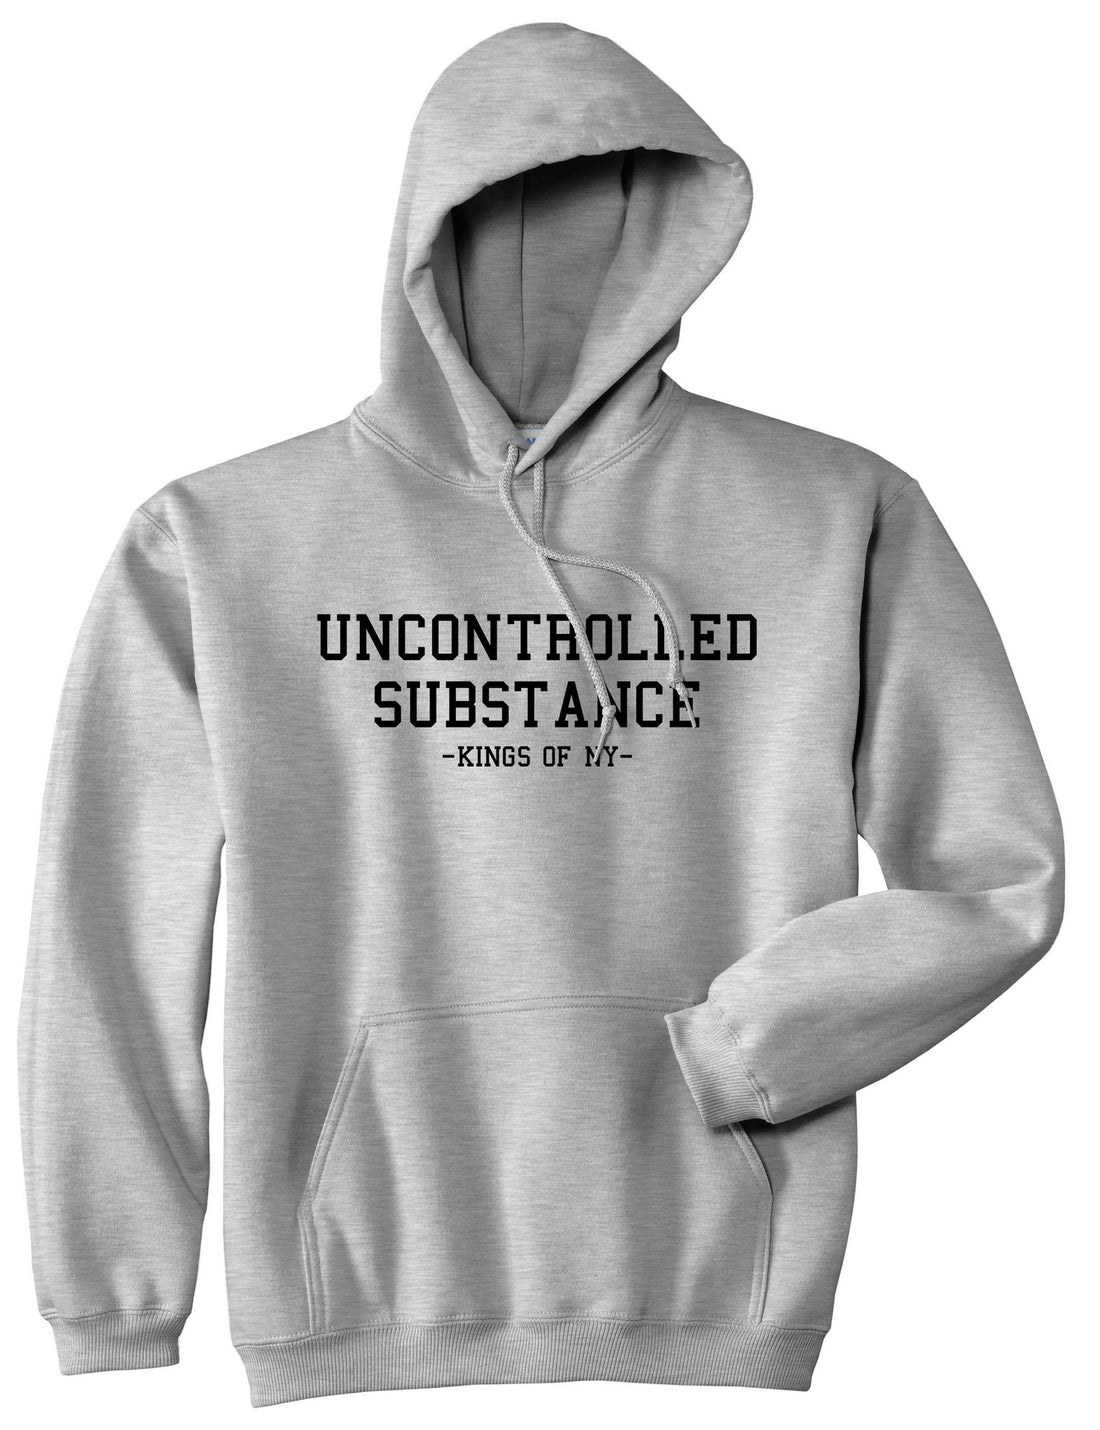 Uncontrolled Substance Pullover Hoodie Hoody in Grey by Kings Of NY